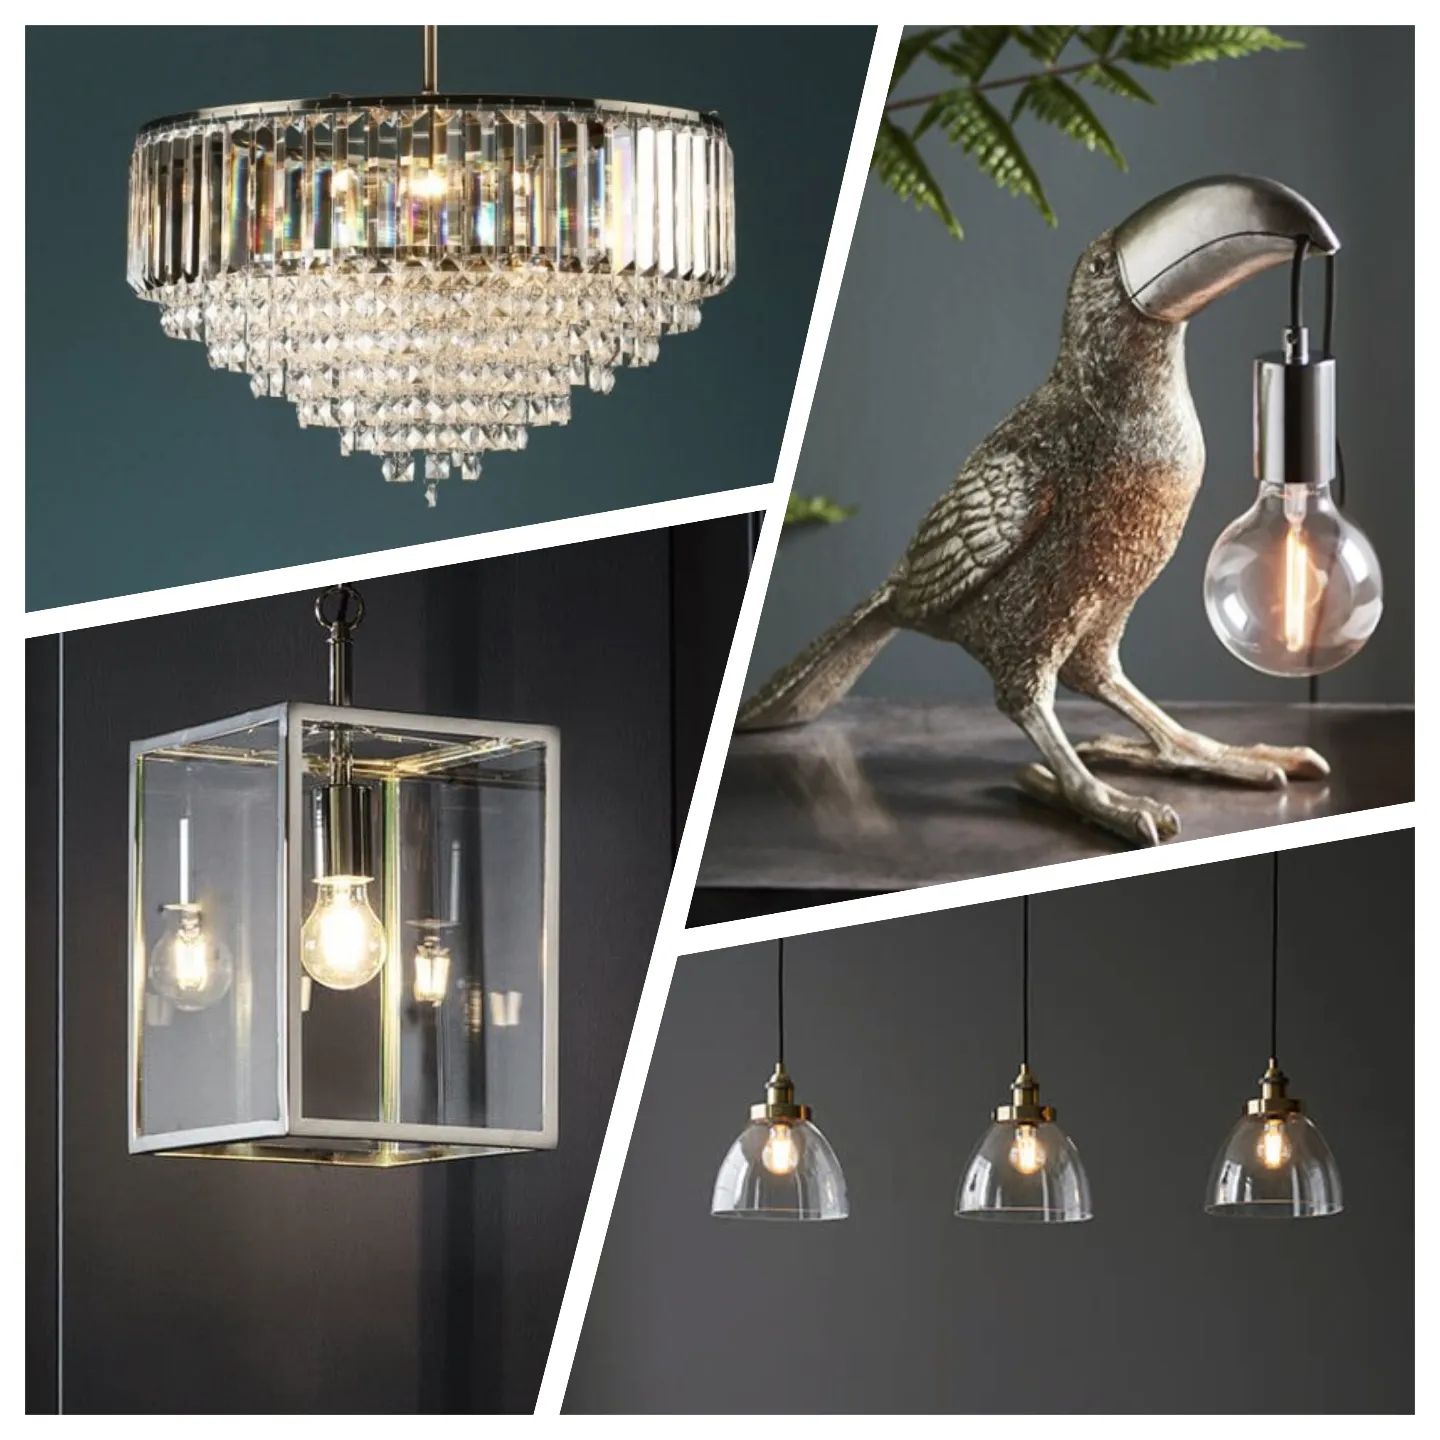 Our lighting showroom is full of beautiful lighting to help you create your dream home. You can also browse our range and shop online at stillorgandecor.ie and have our fittings delivered to your door anywhere in Ireland. 💡